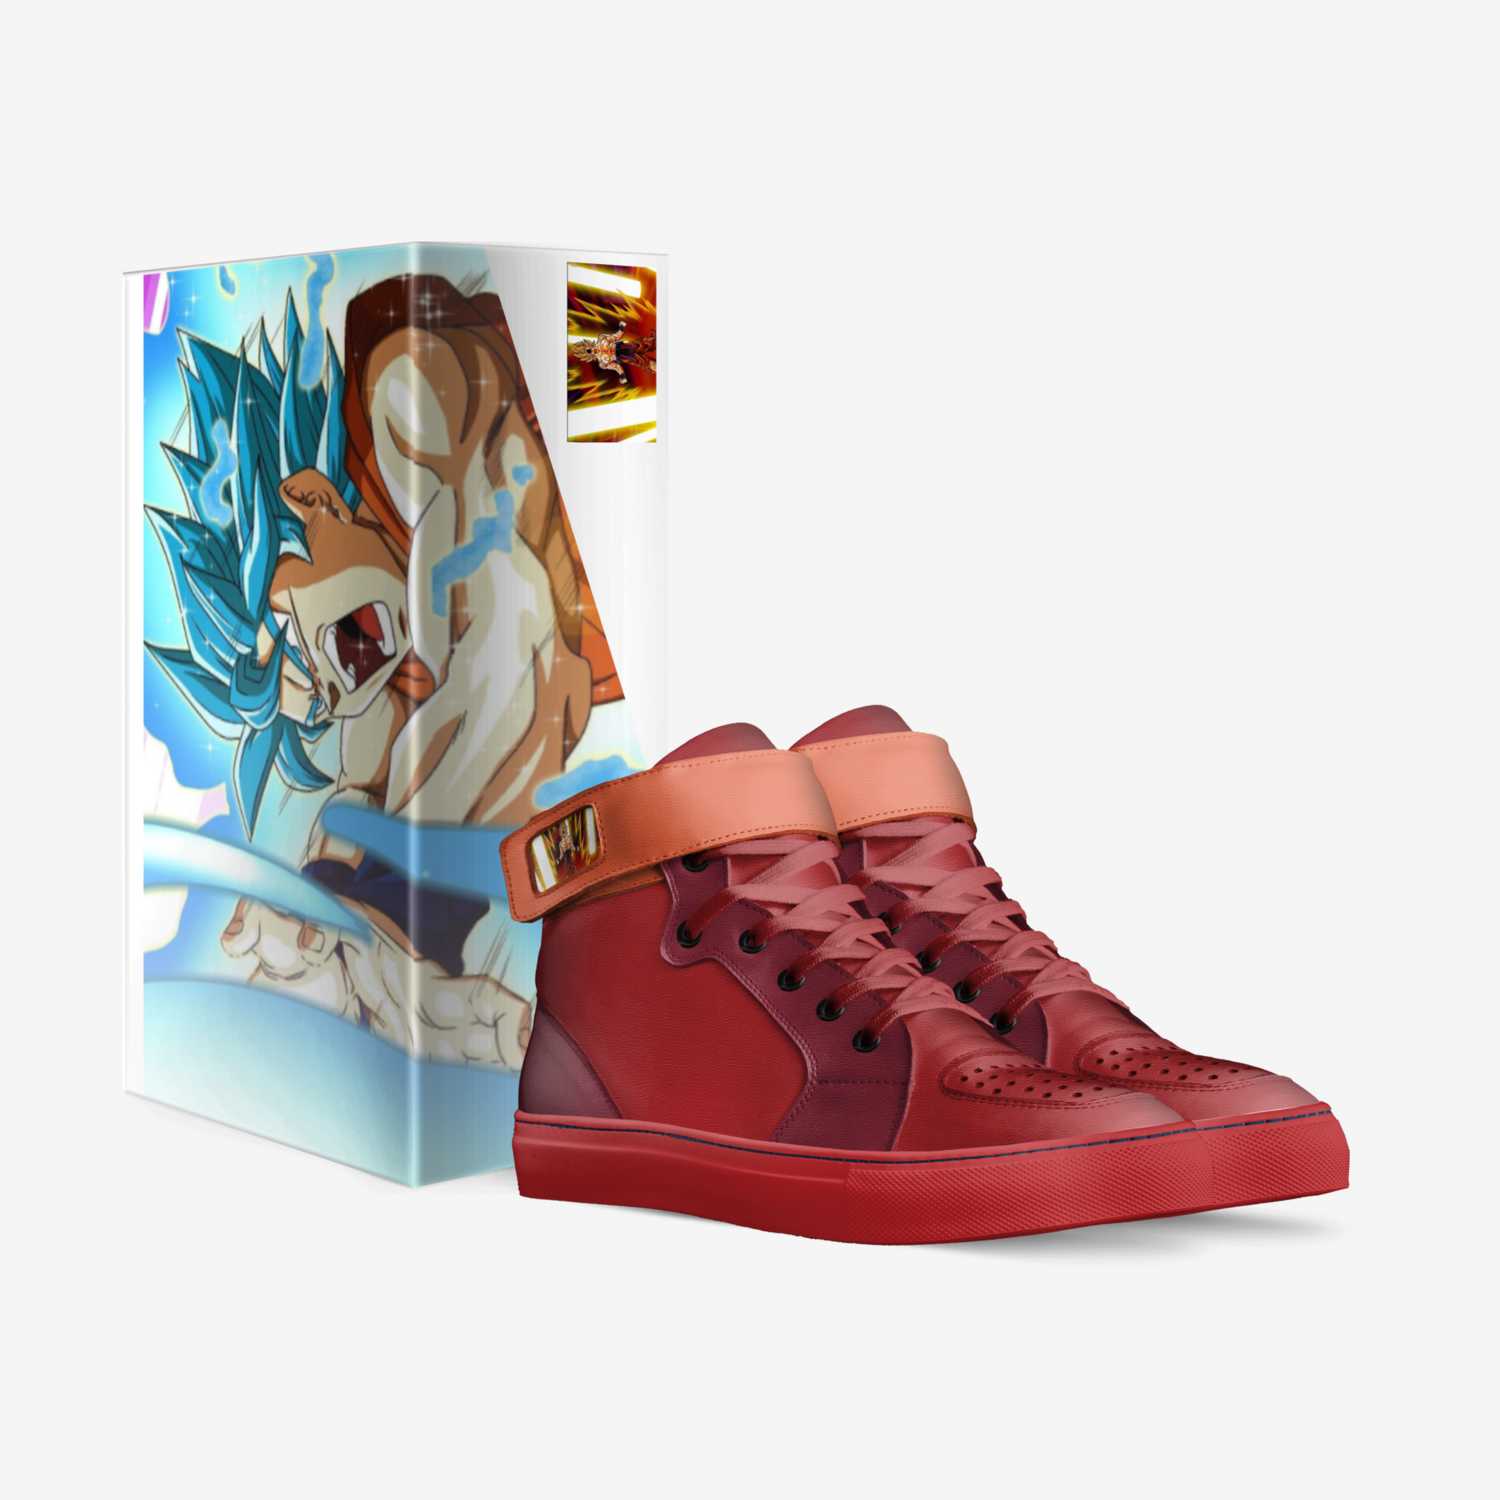 LXP 1s custom made in Italy shoes by Poptart | Box view